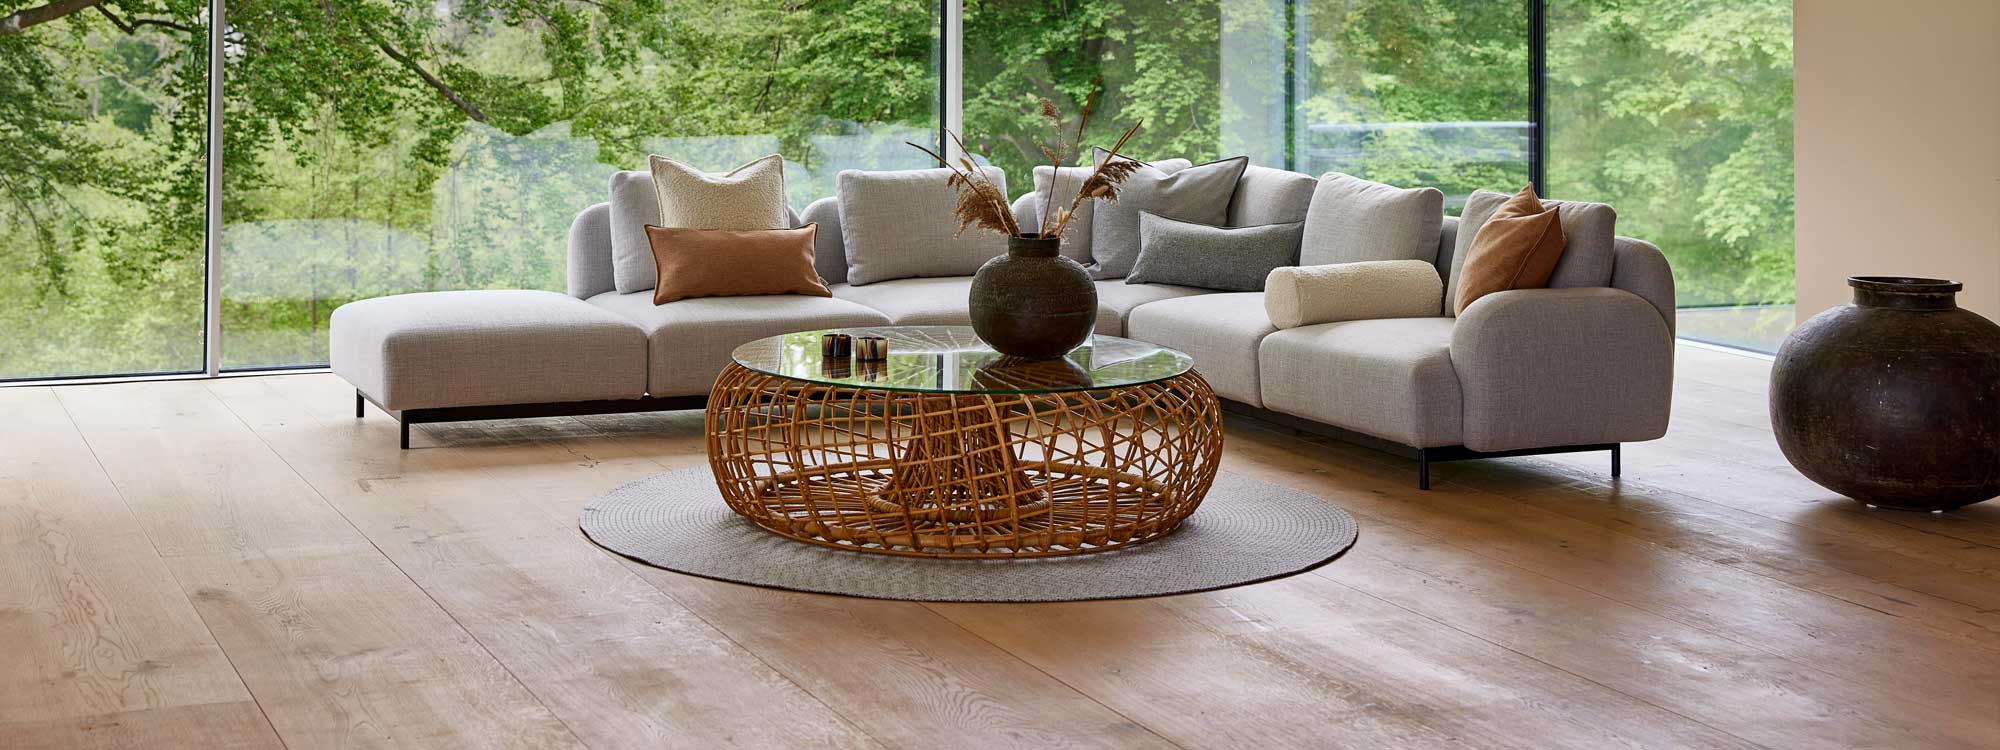 Image of Aura large corner sofa with upholstery in Light-Grey Cane-line Ambiance, with Nest natural rattan coffee table in the centre